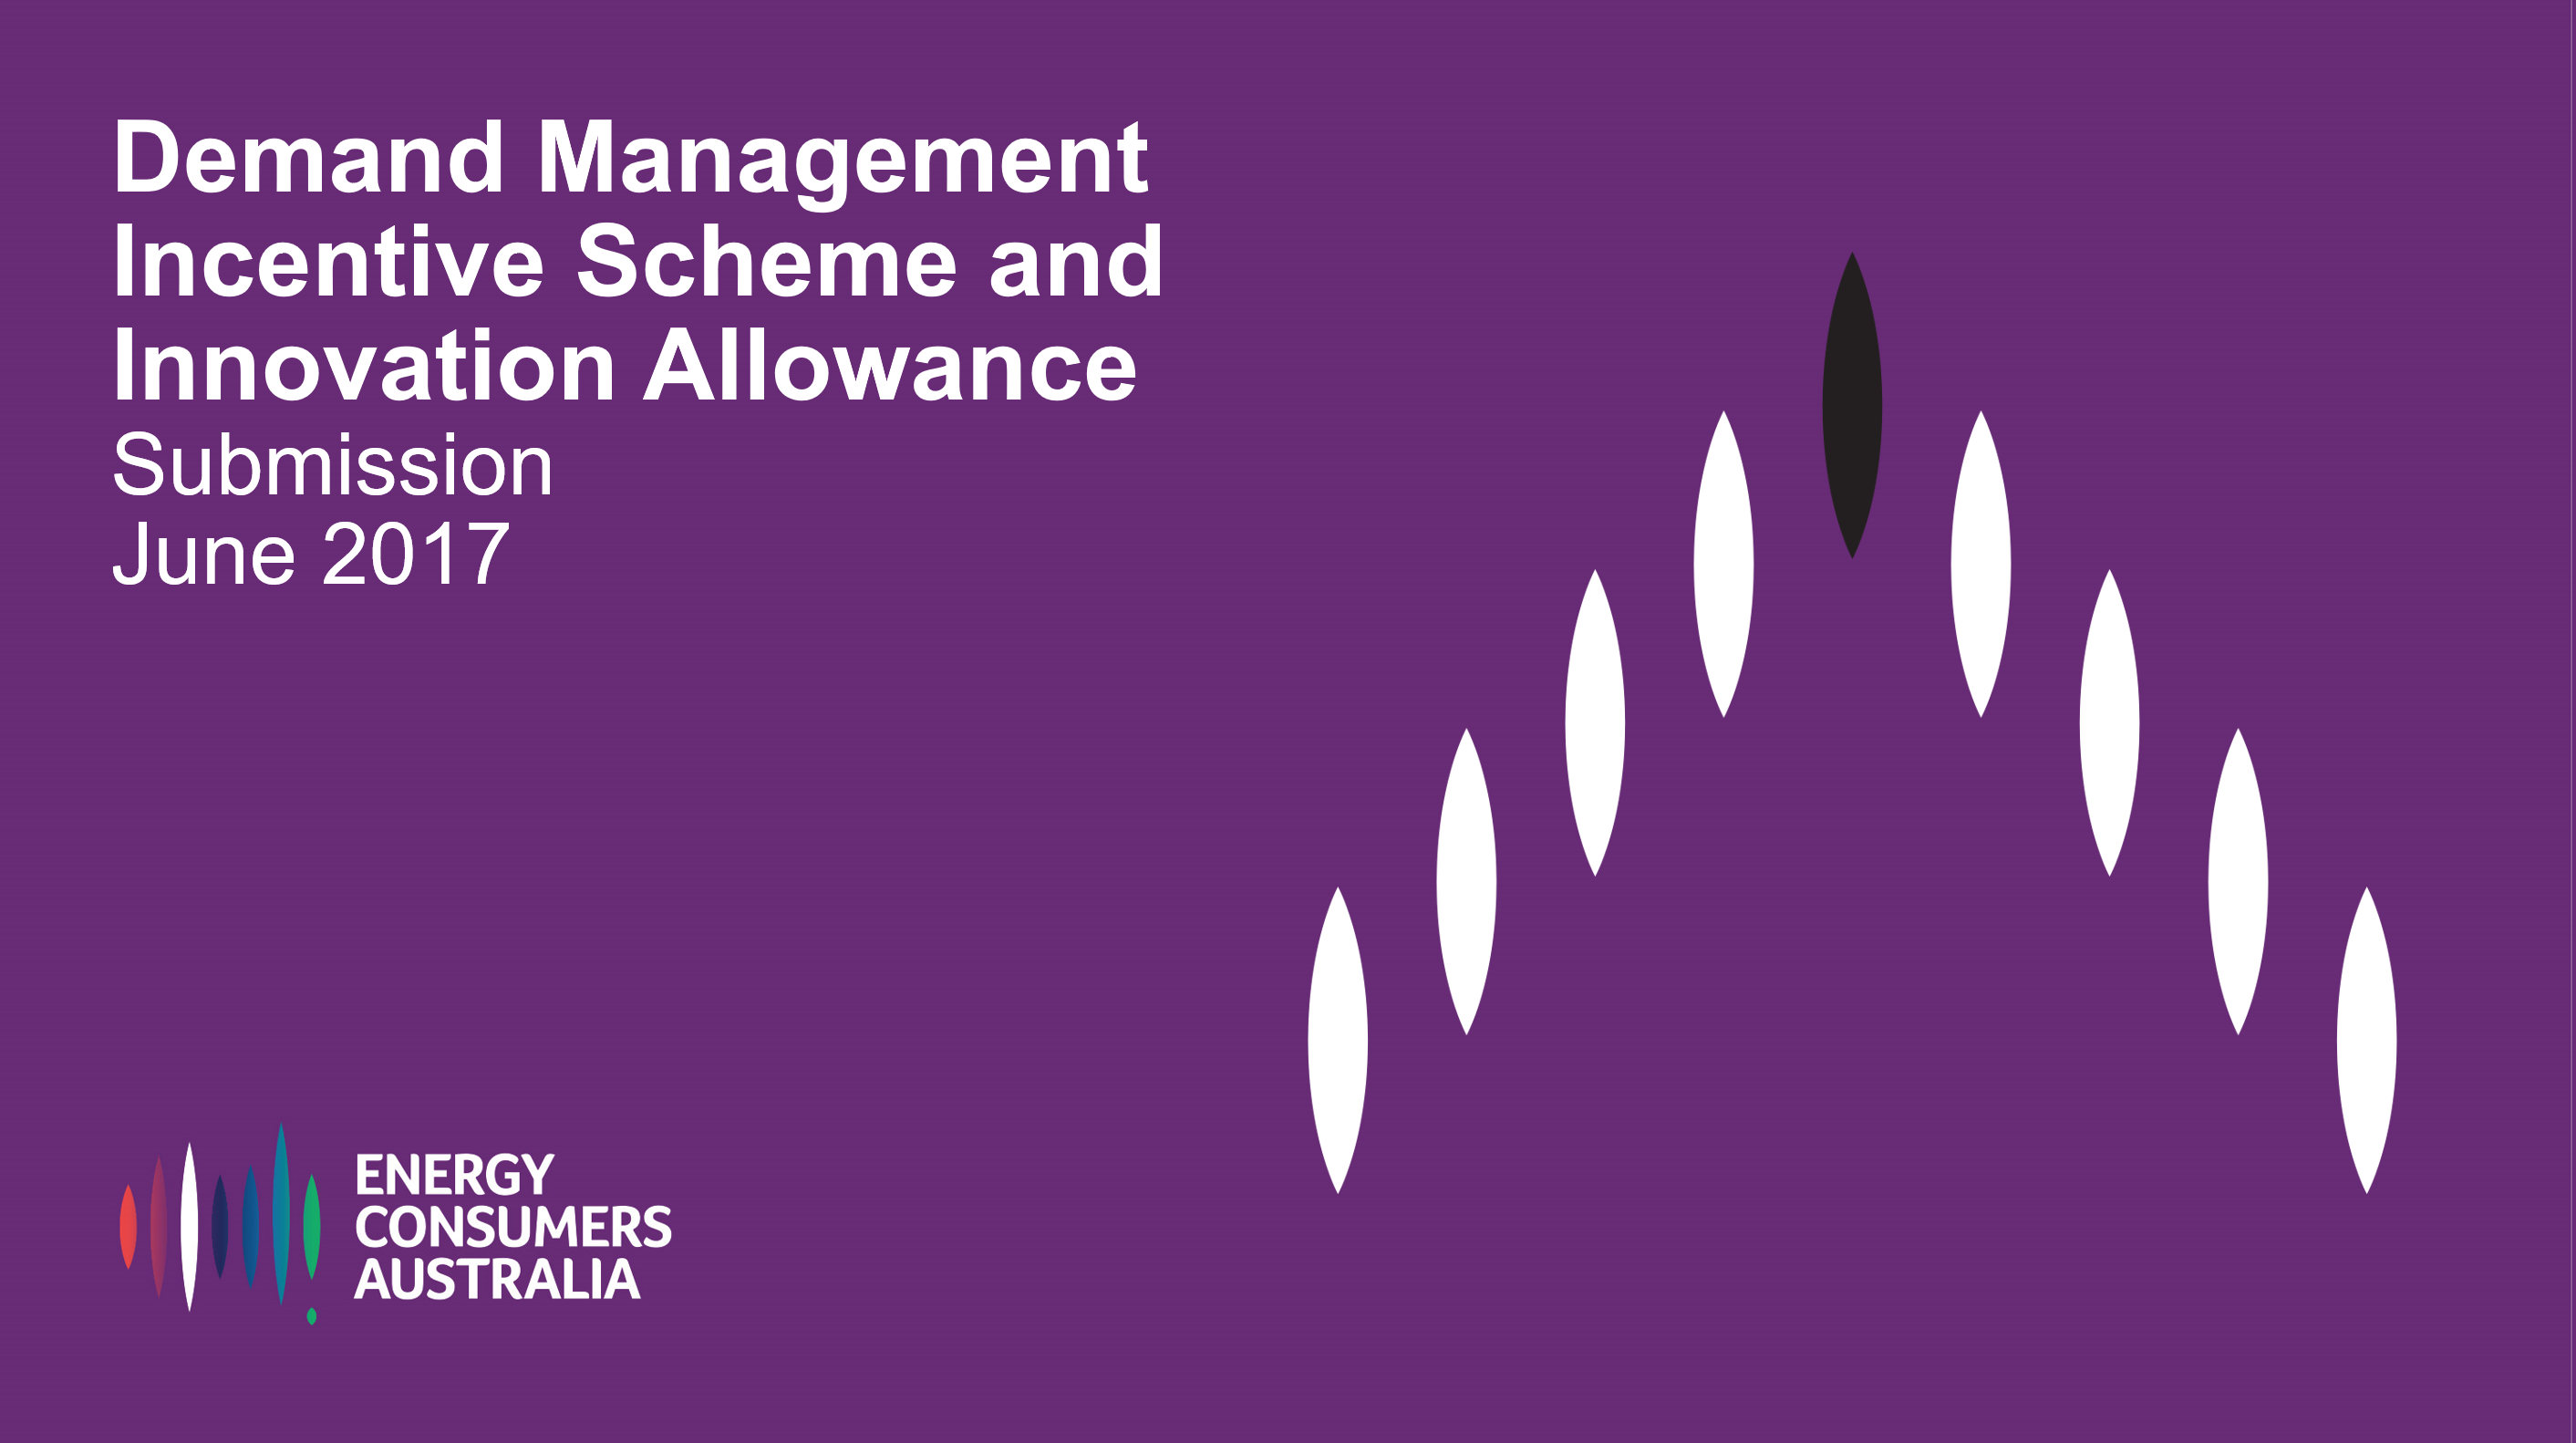 Demand Management Incentive Scheme and Innovation Allowance: Submission